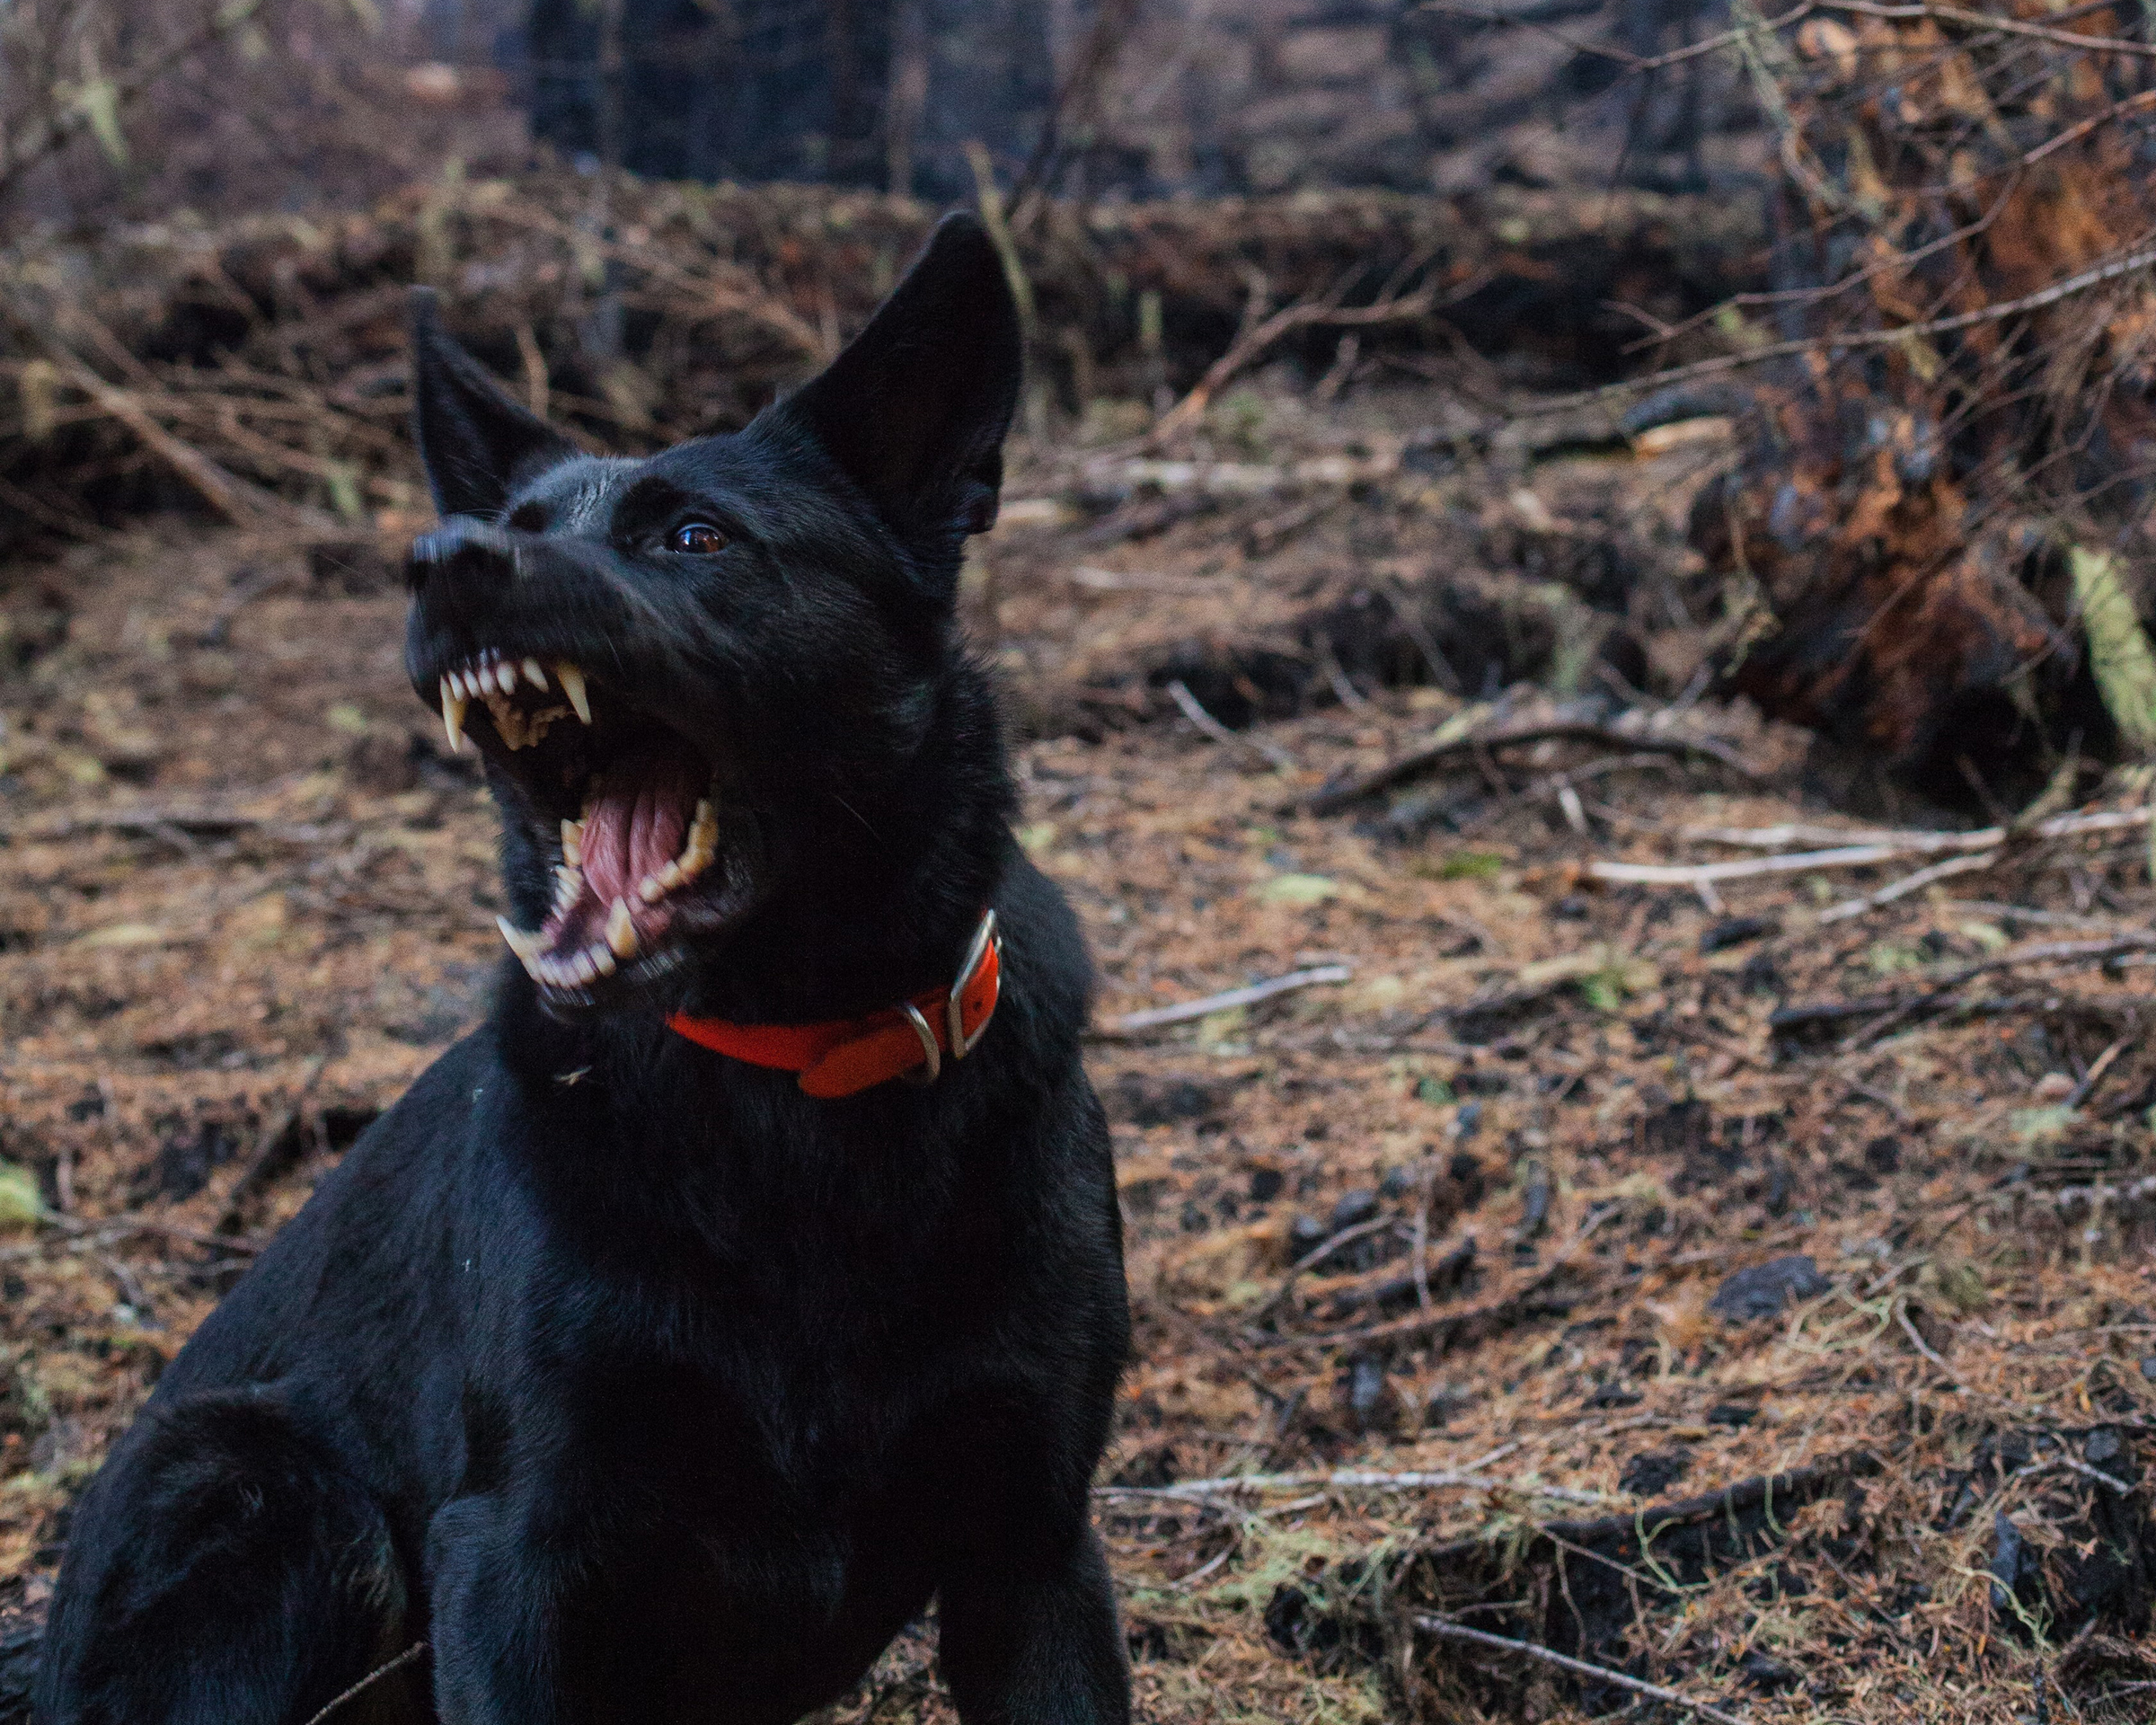 Black dog showing it's teeth in a wooded area - Spitzer Legal Dog Bite Practice Area